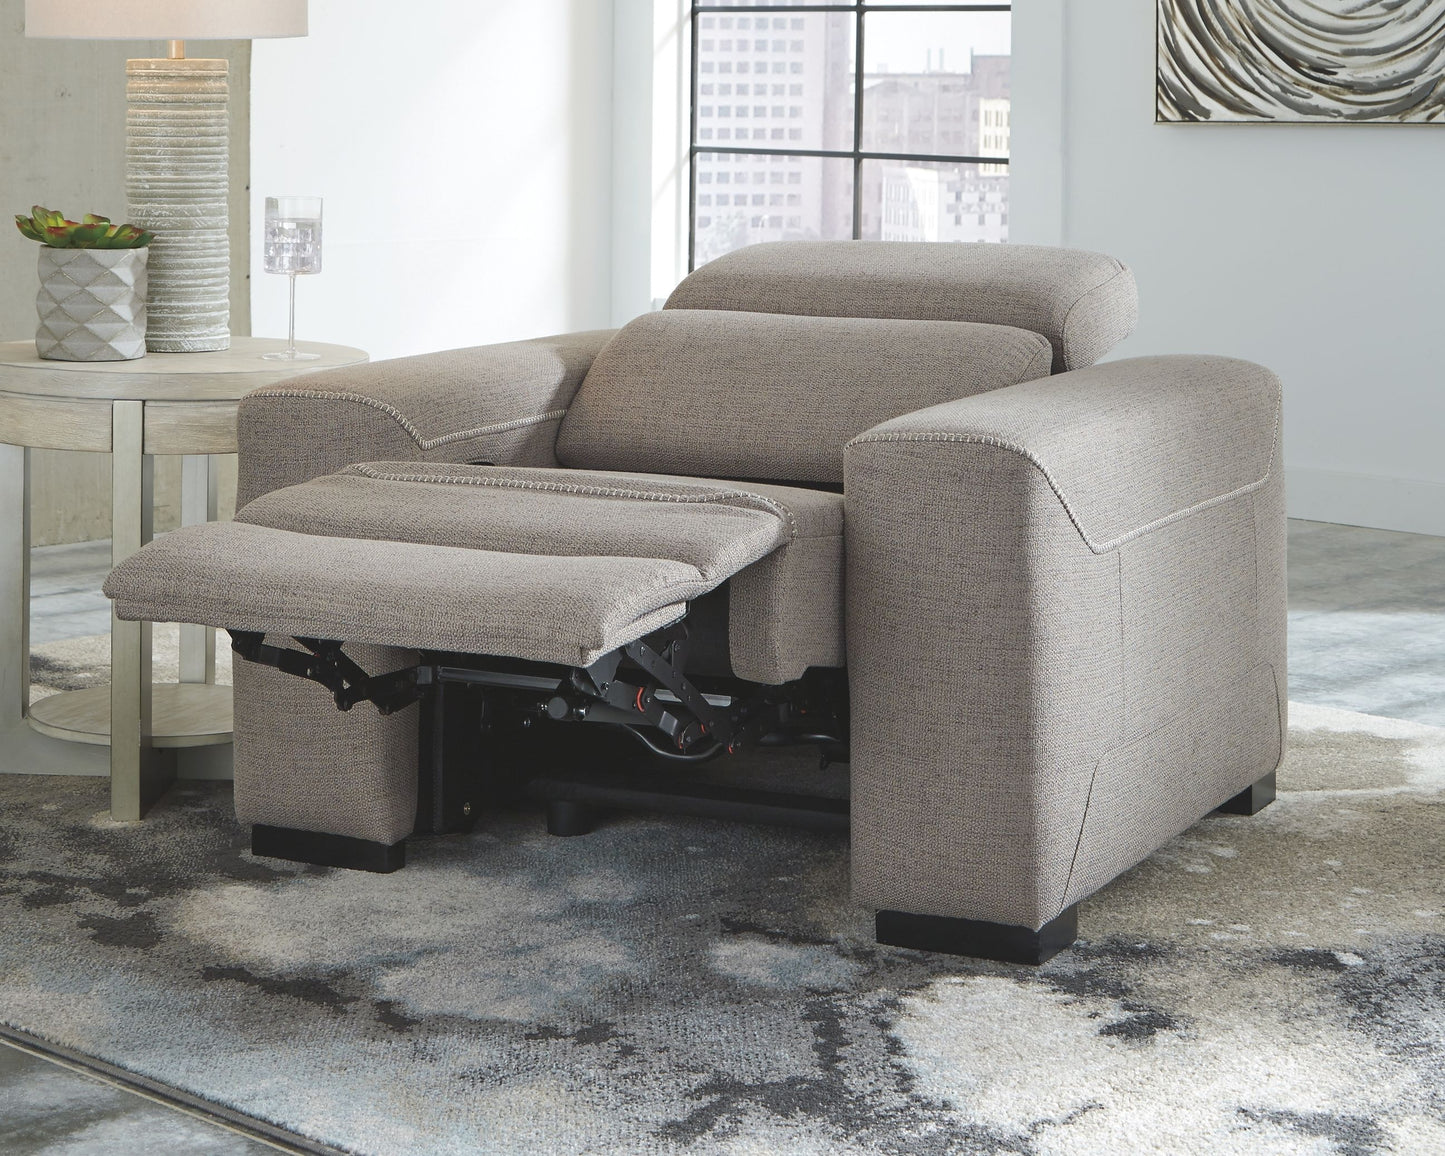 Mabton - Gray - 4 Pc. - Left Arm Facing Power Recliner 3 Pc Sectional, Recliner